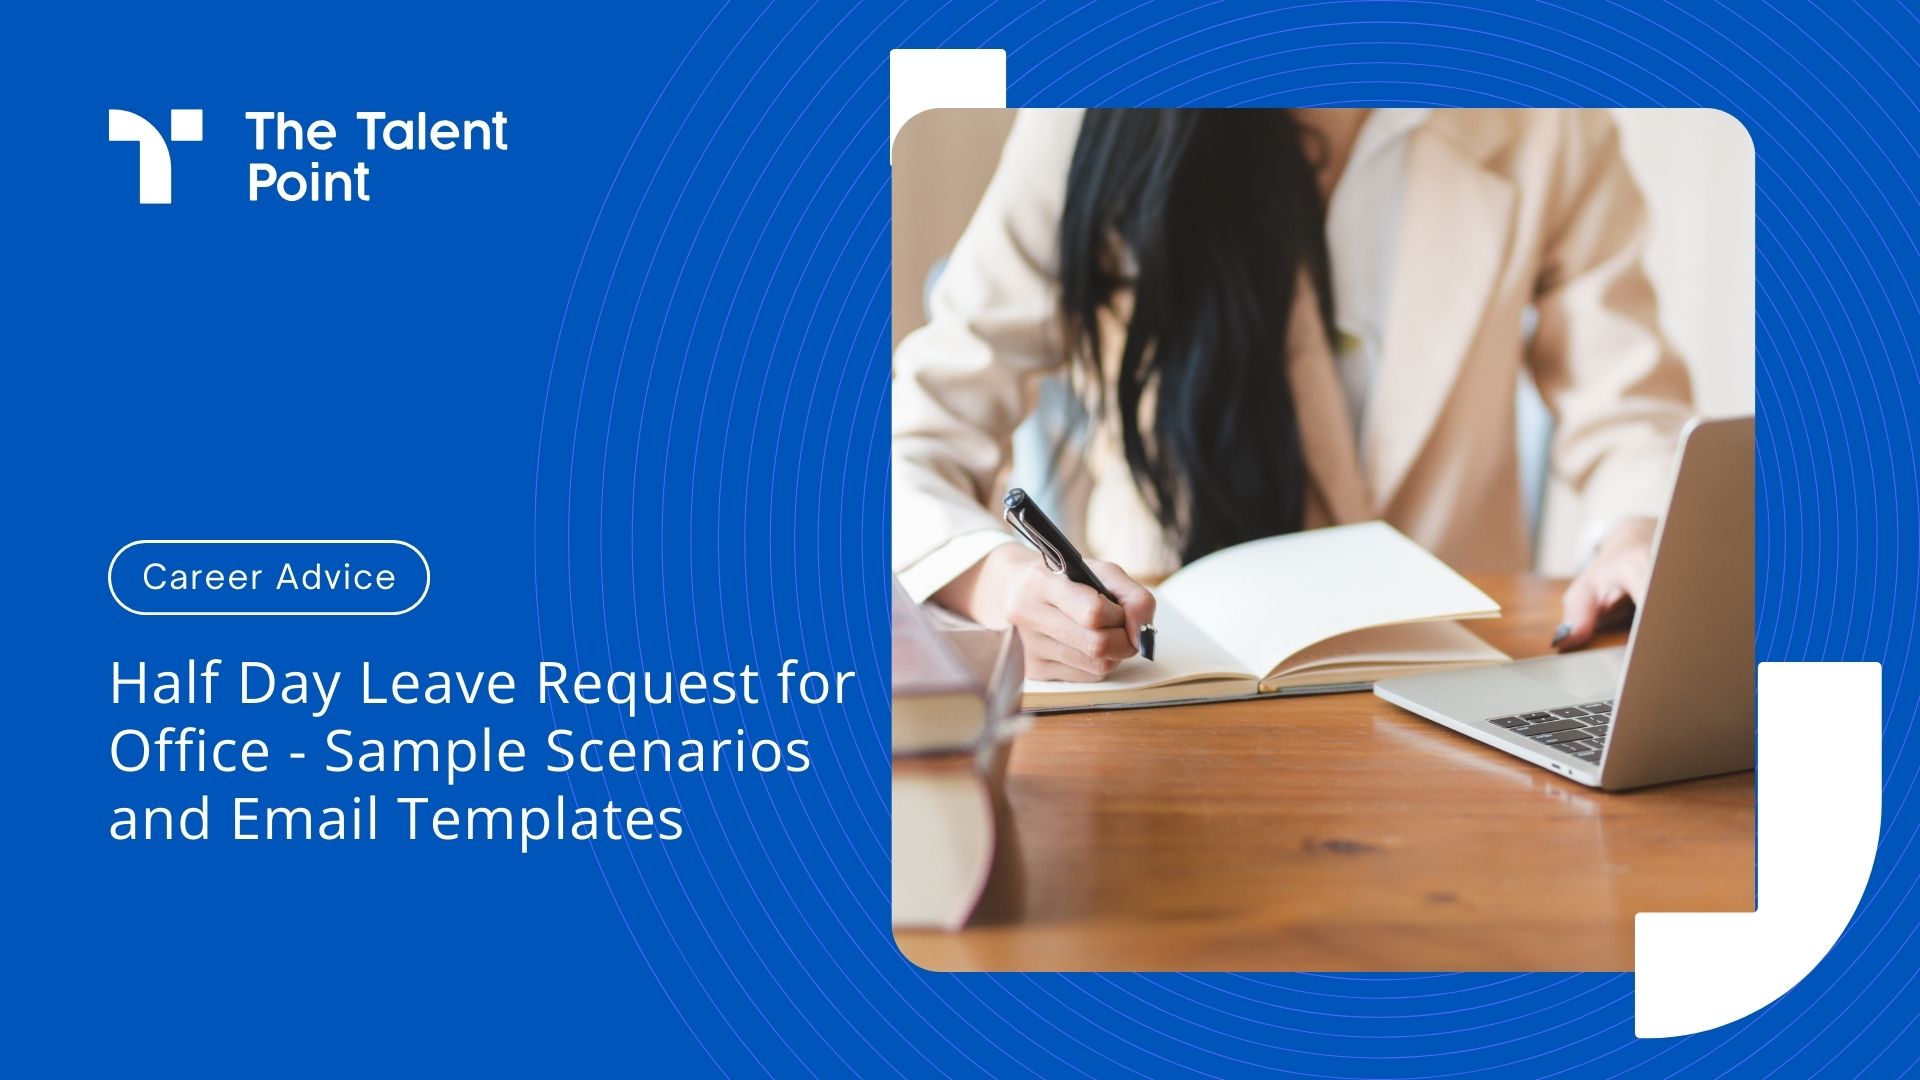 Half Day Leave Request for Office - Sample Scenarios and Email Templates